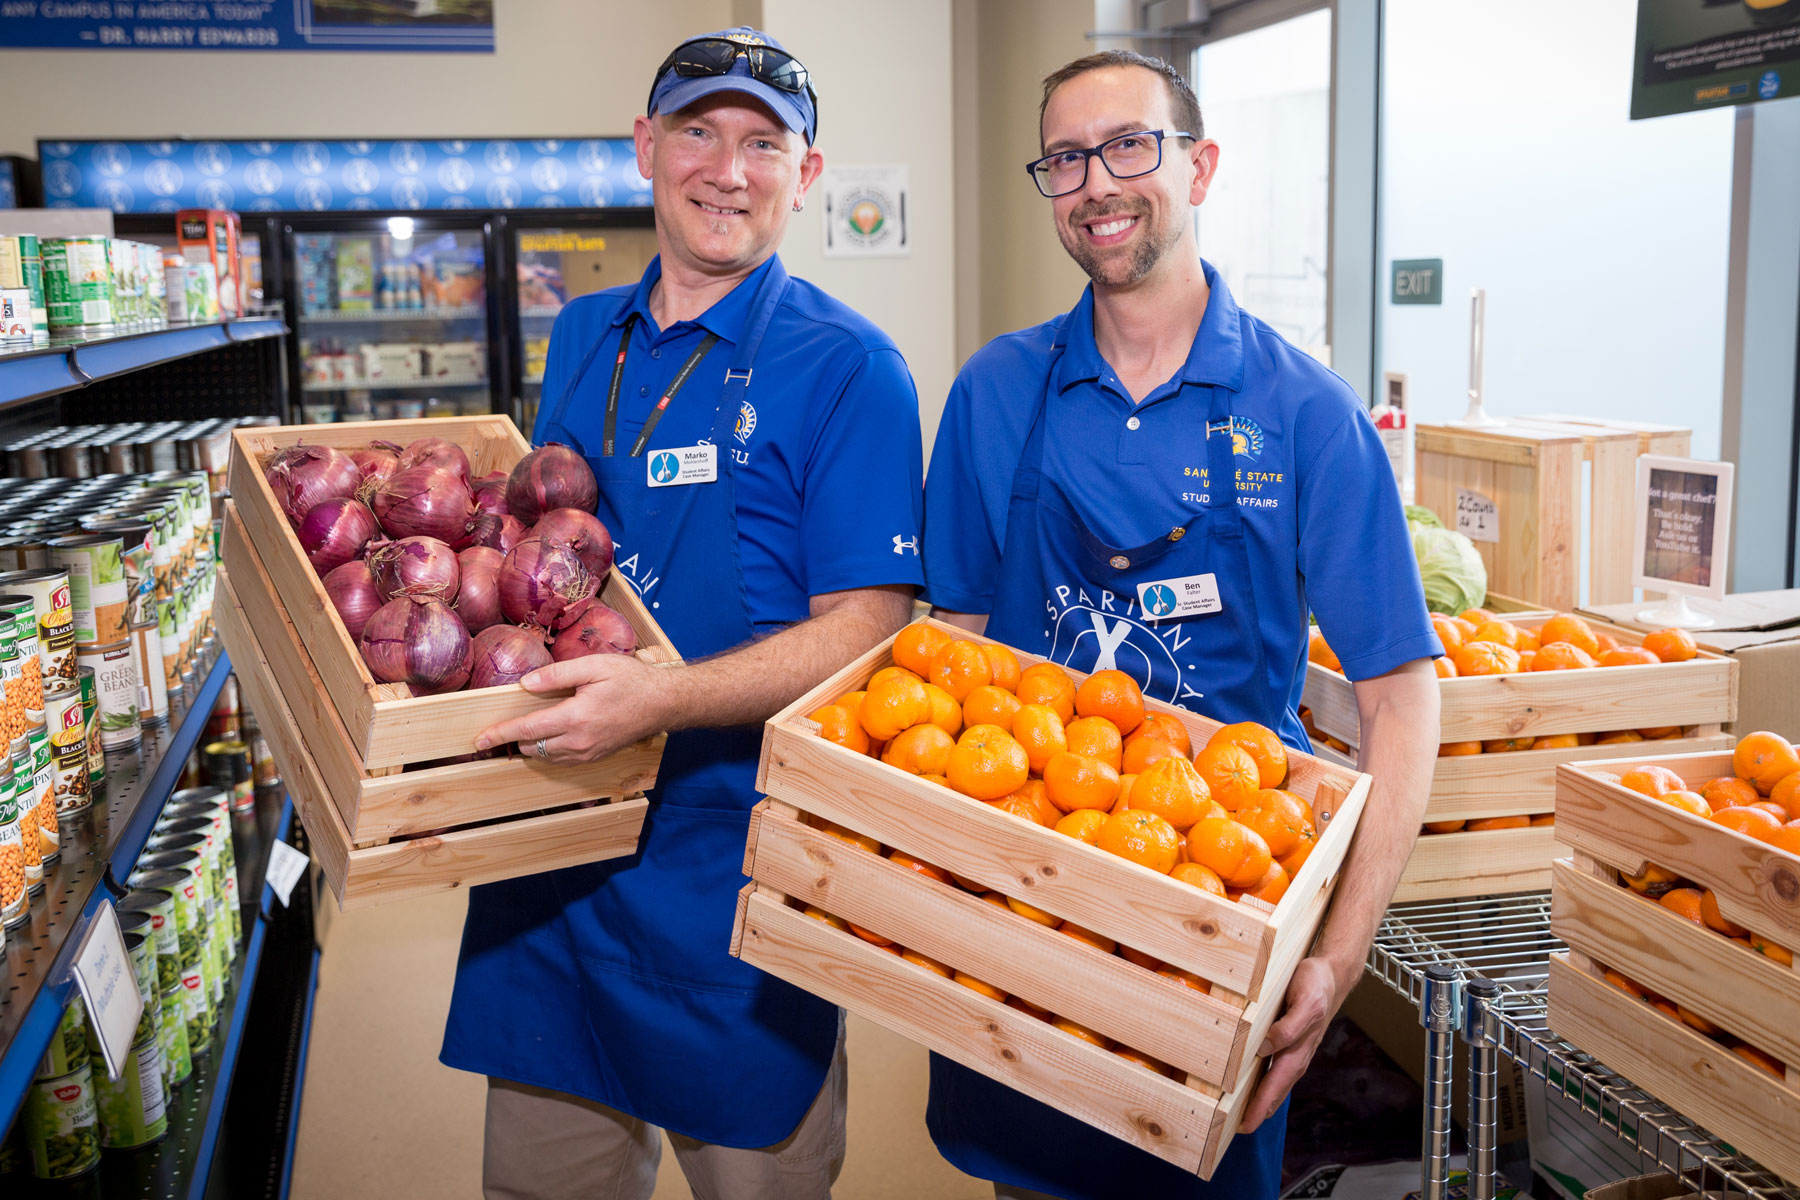 SJSU Cares staff holds fresh produce offerings from the Spartan Food Pantry.